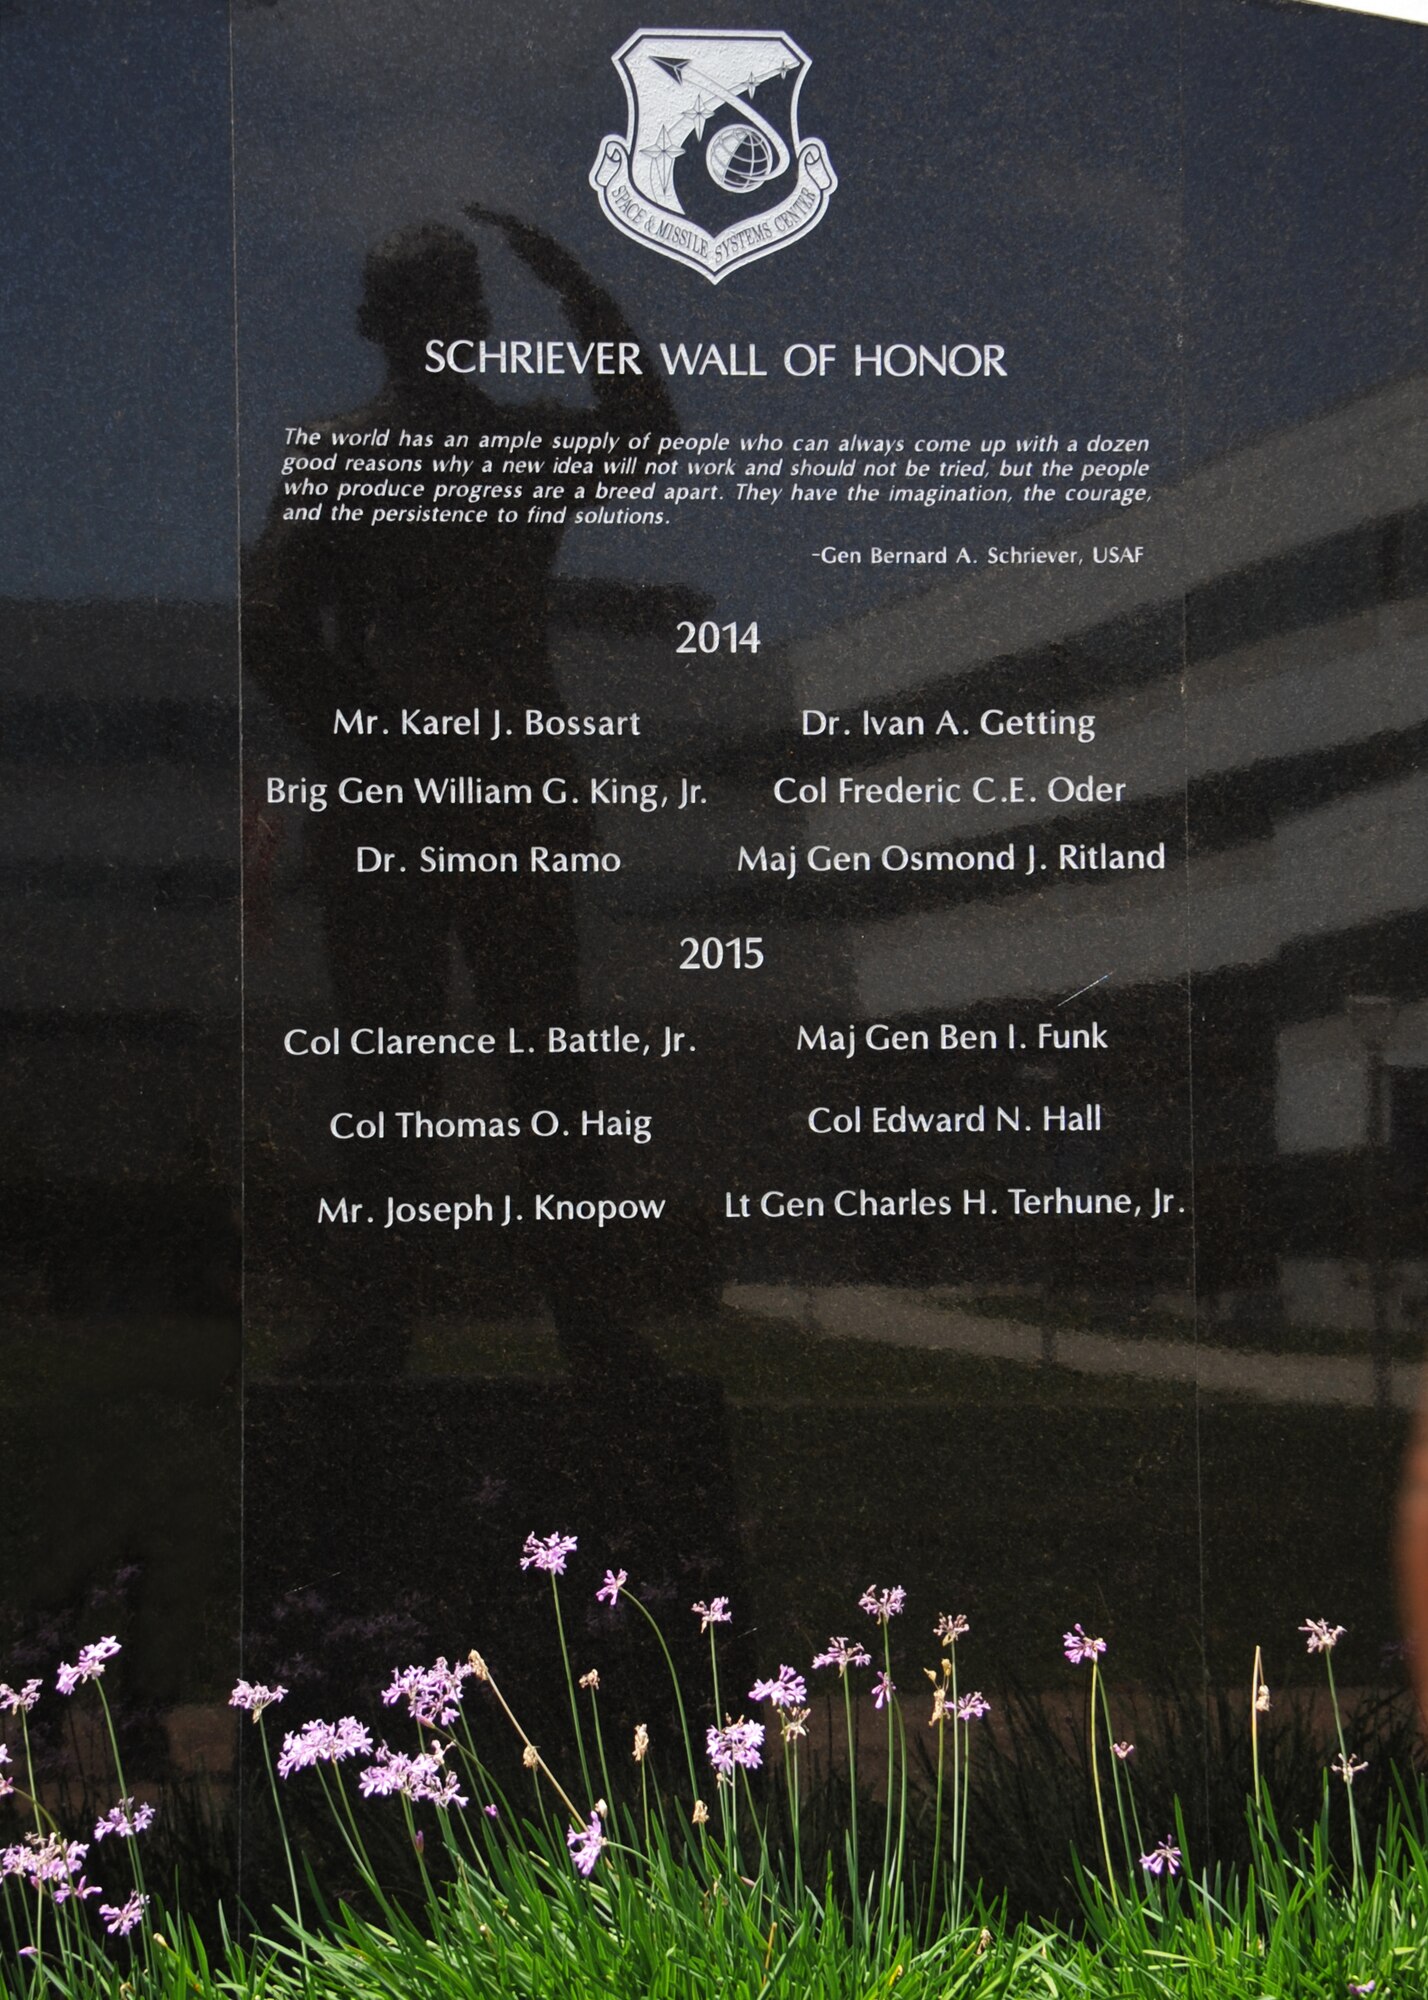 Six early Air Force and civilian space pioneers were honored during a ceremony May 14, 2015 to unveil their names, newly inscribed on a wall of polished black granite at the General Bernard A. Schriever Memorial, located on the grounds of the Space and Missile Systems Center at Los Angeles Air Force base in El Segundo, Calif. (U.S. Air Force photo/Van Ha)